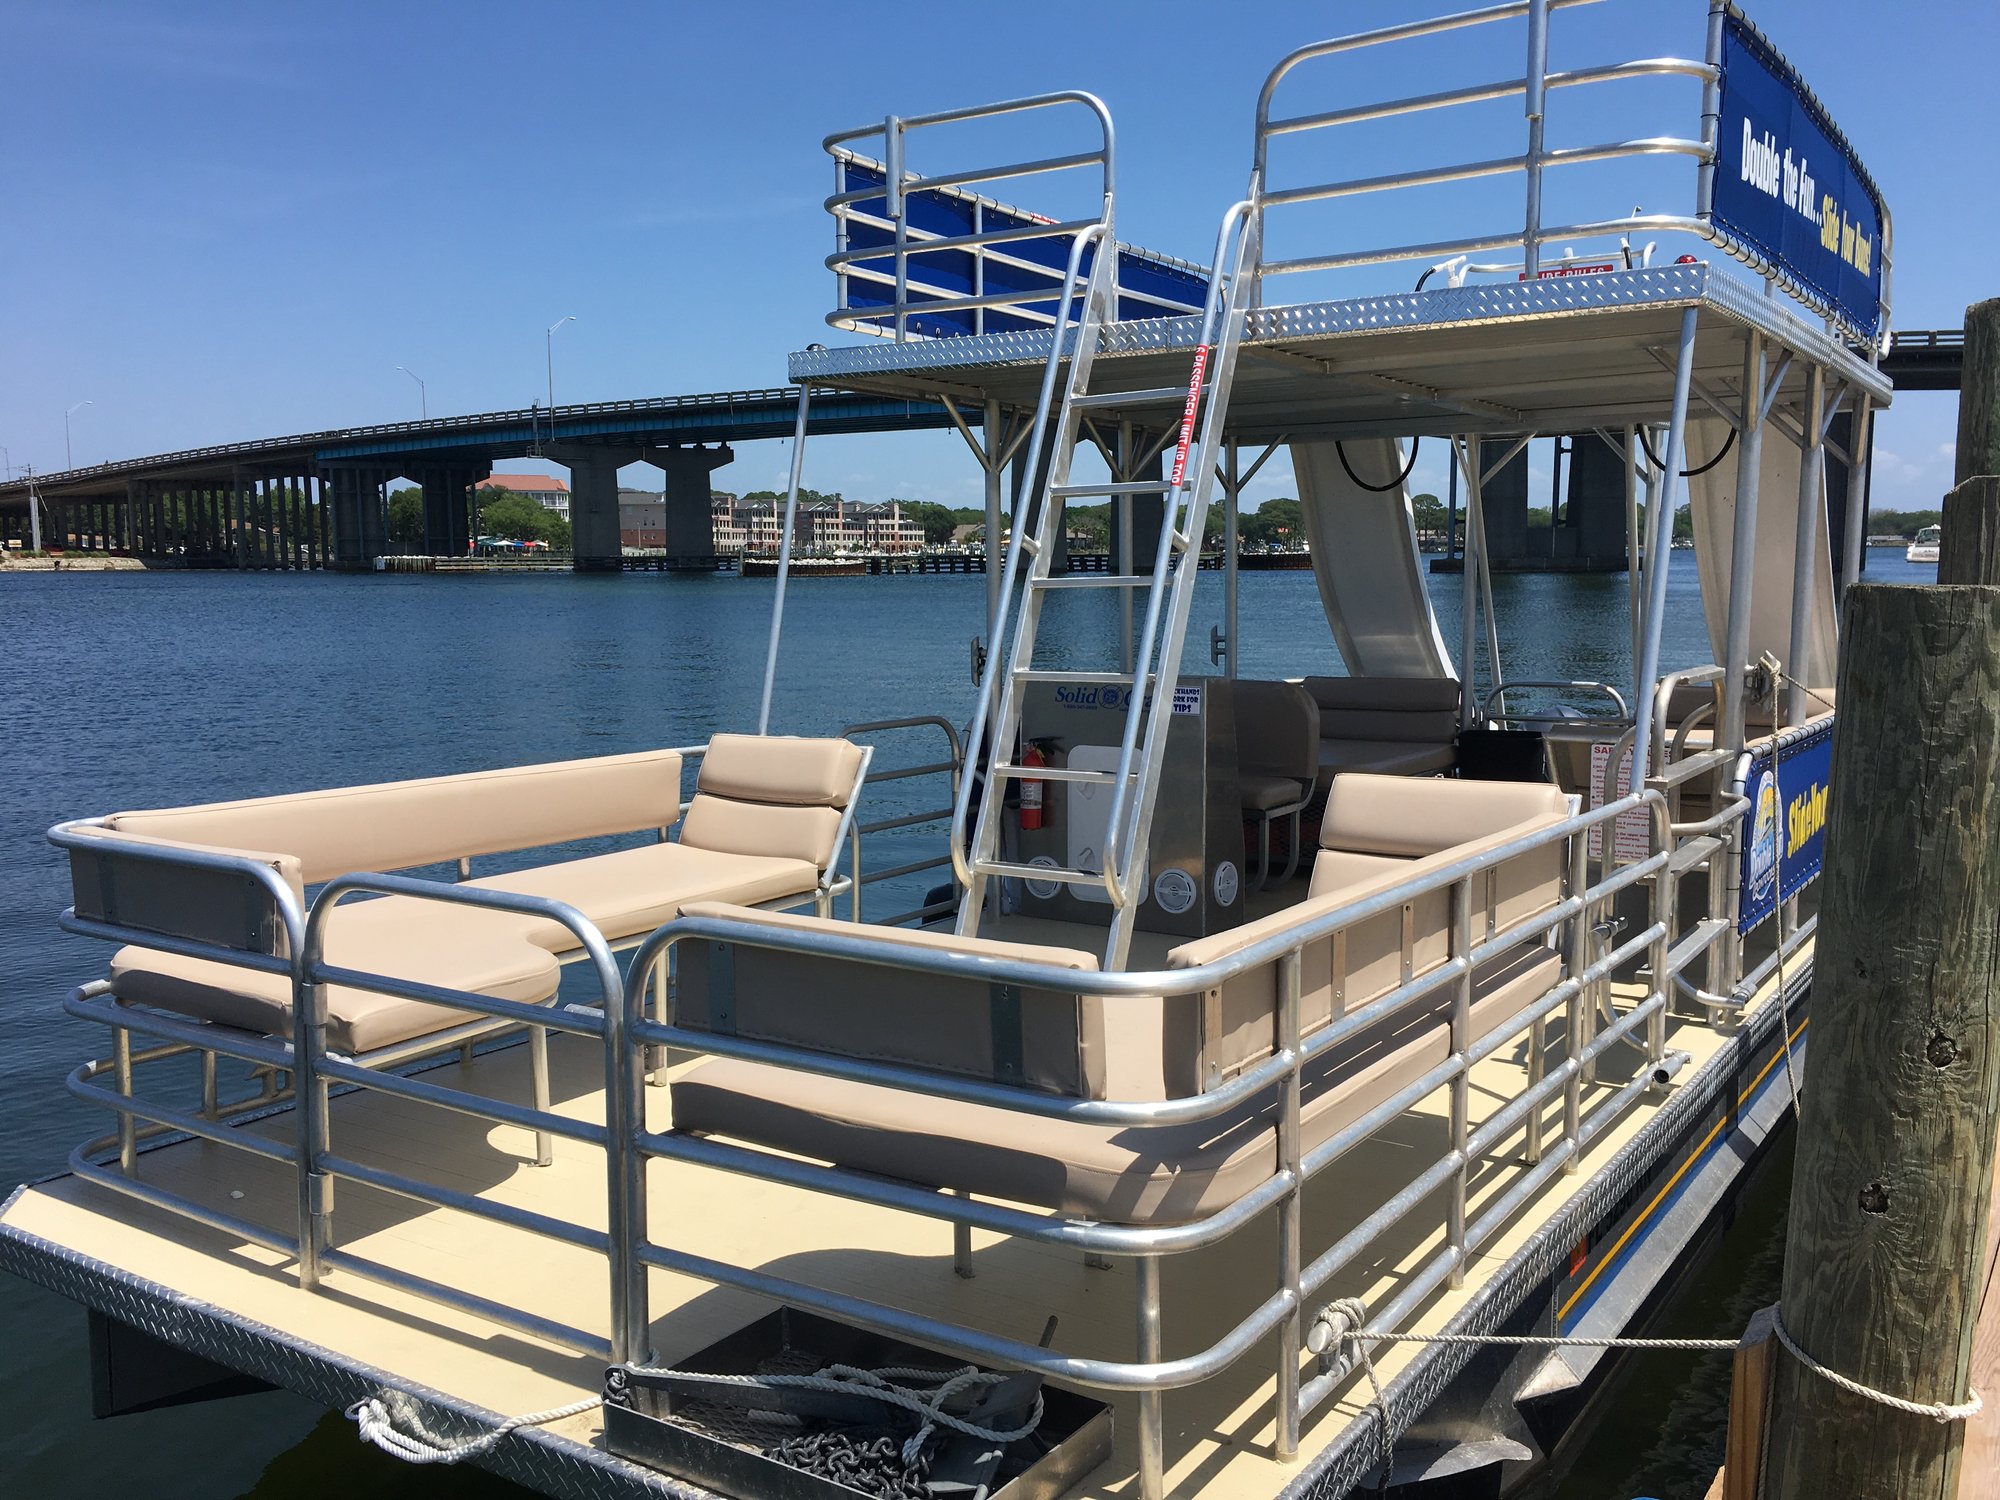 double decker pontoon boat with two slides without people on it